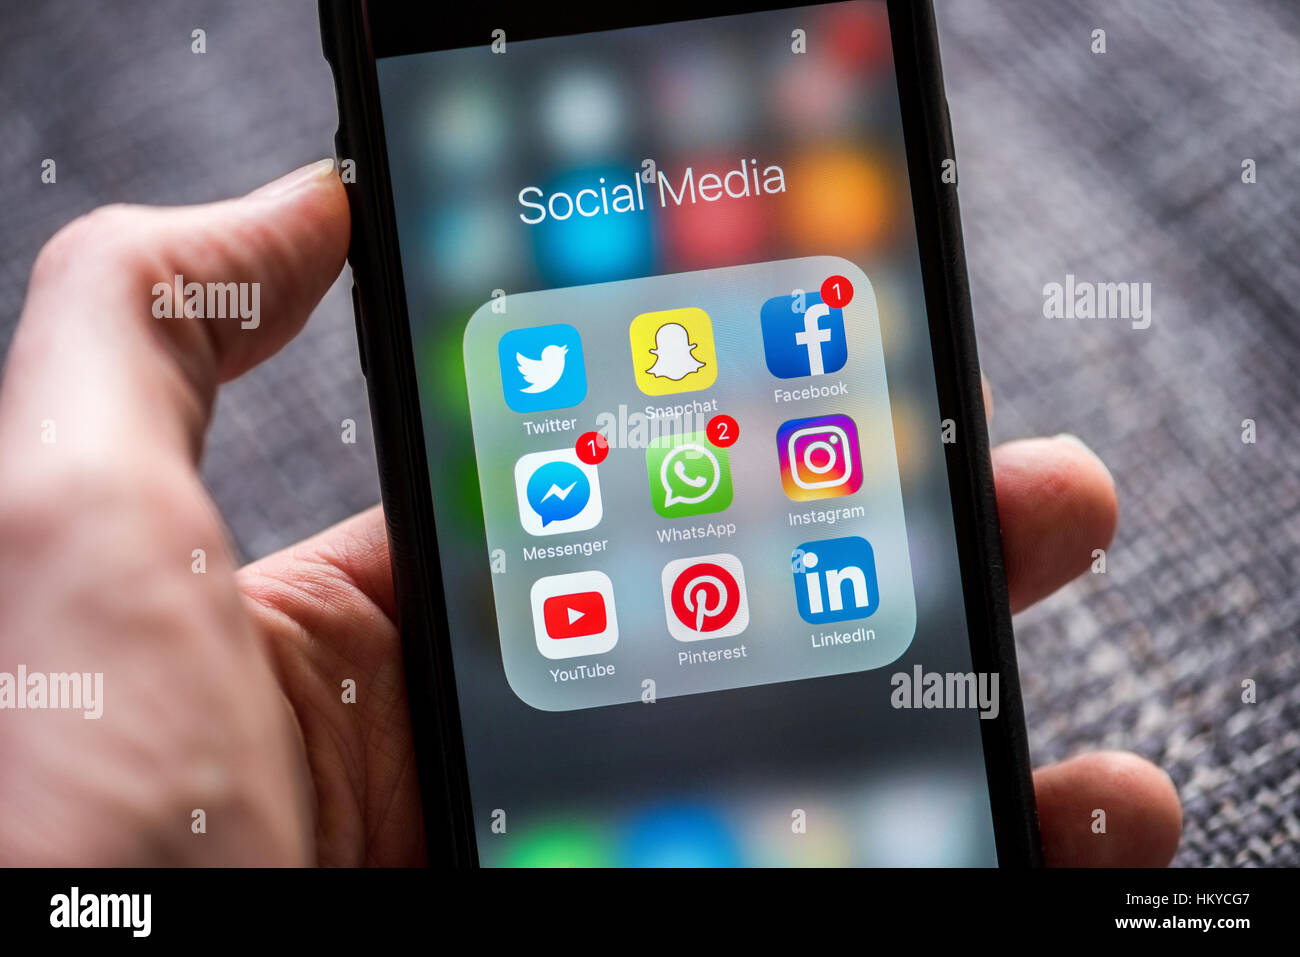 Social Media App Icons Displayed On Apple Iphone Stock Photo Royalty